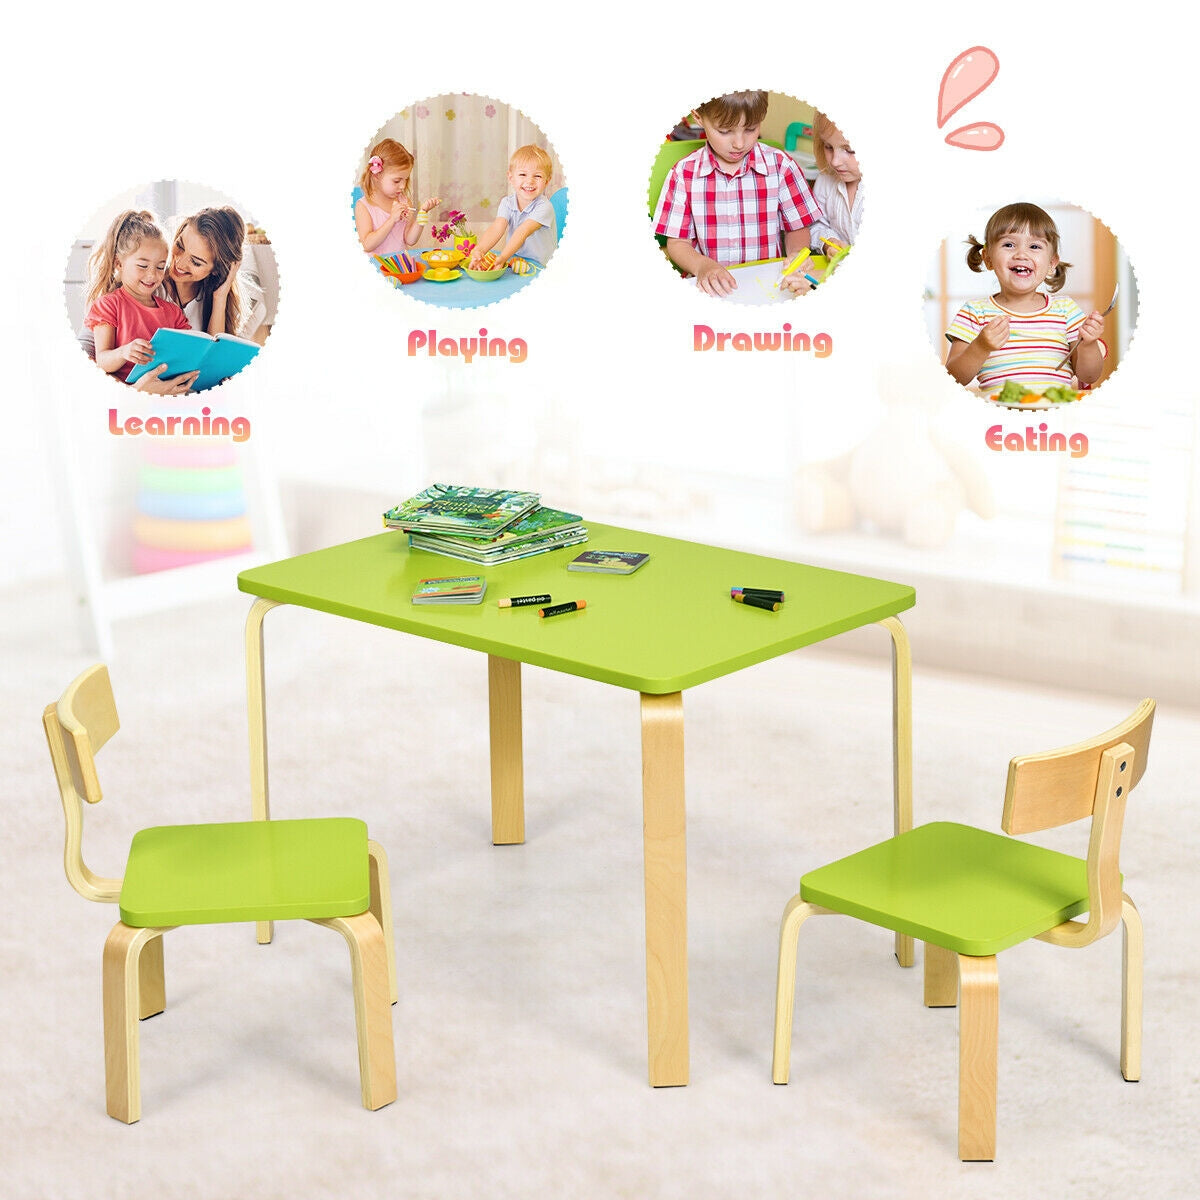 Versatile & Stylish: Perfect for any space, our multifunctional table and chair set suits kindergartens, bedrooms, and game rooms. This stylish and modern furniture set lets your kids eat, read, draw, or play games.